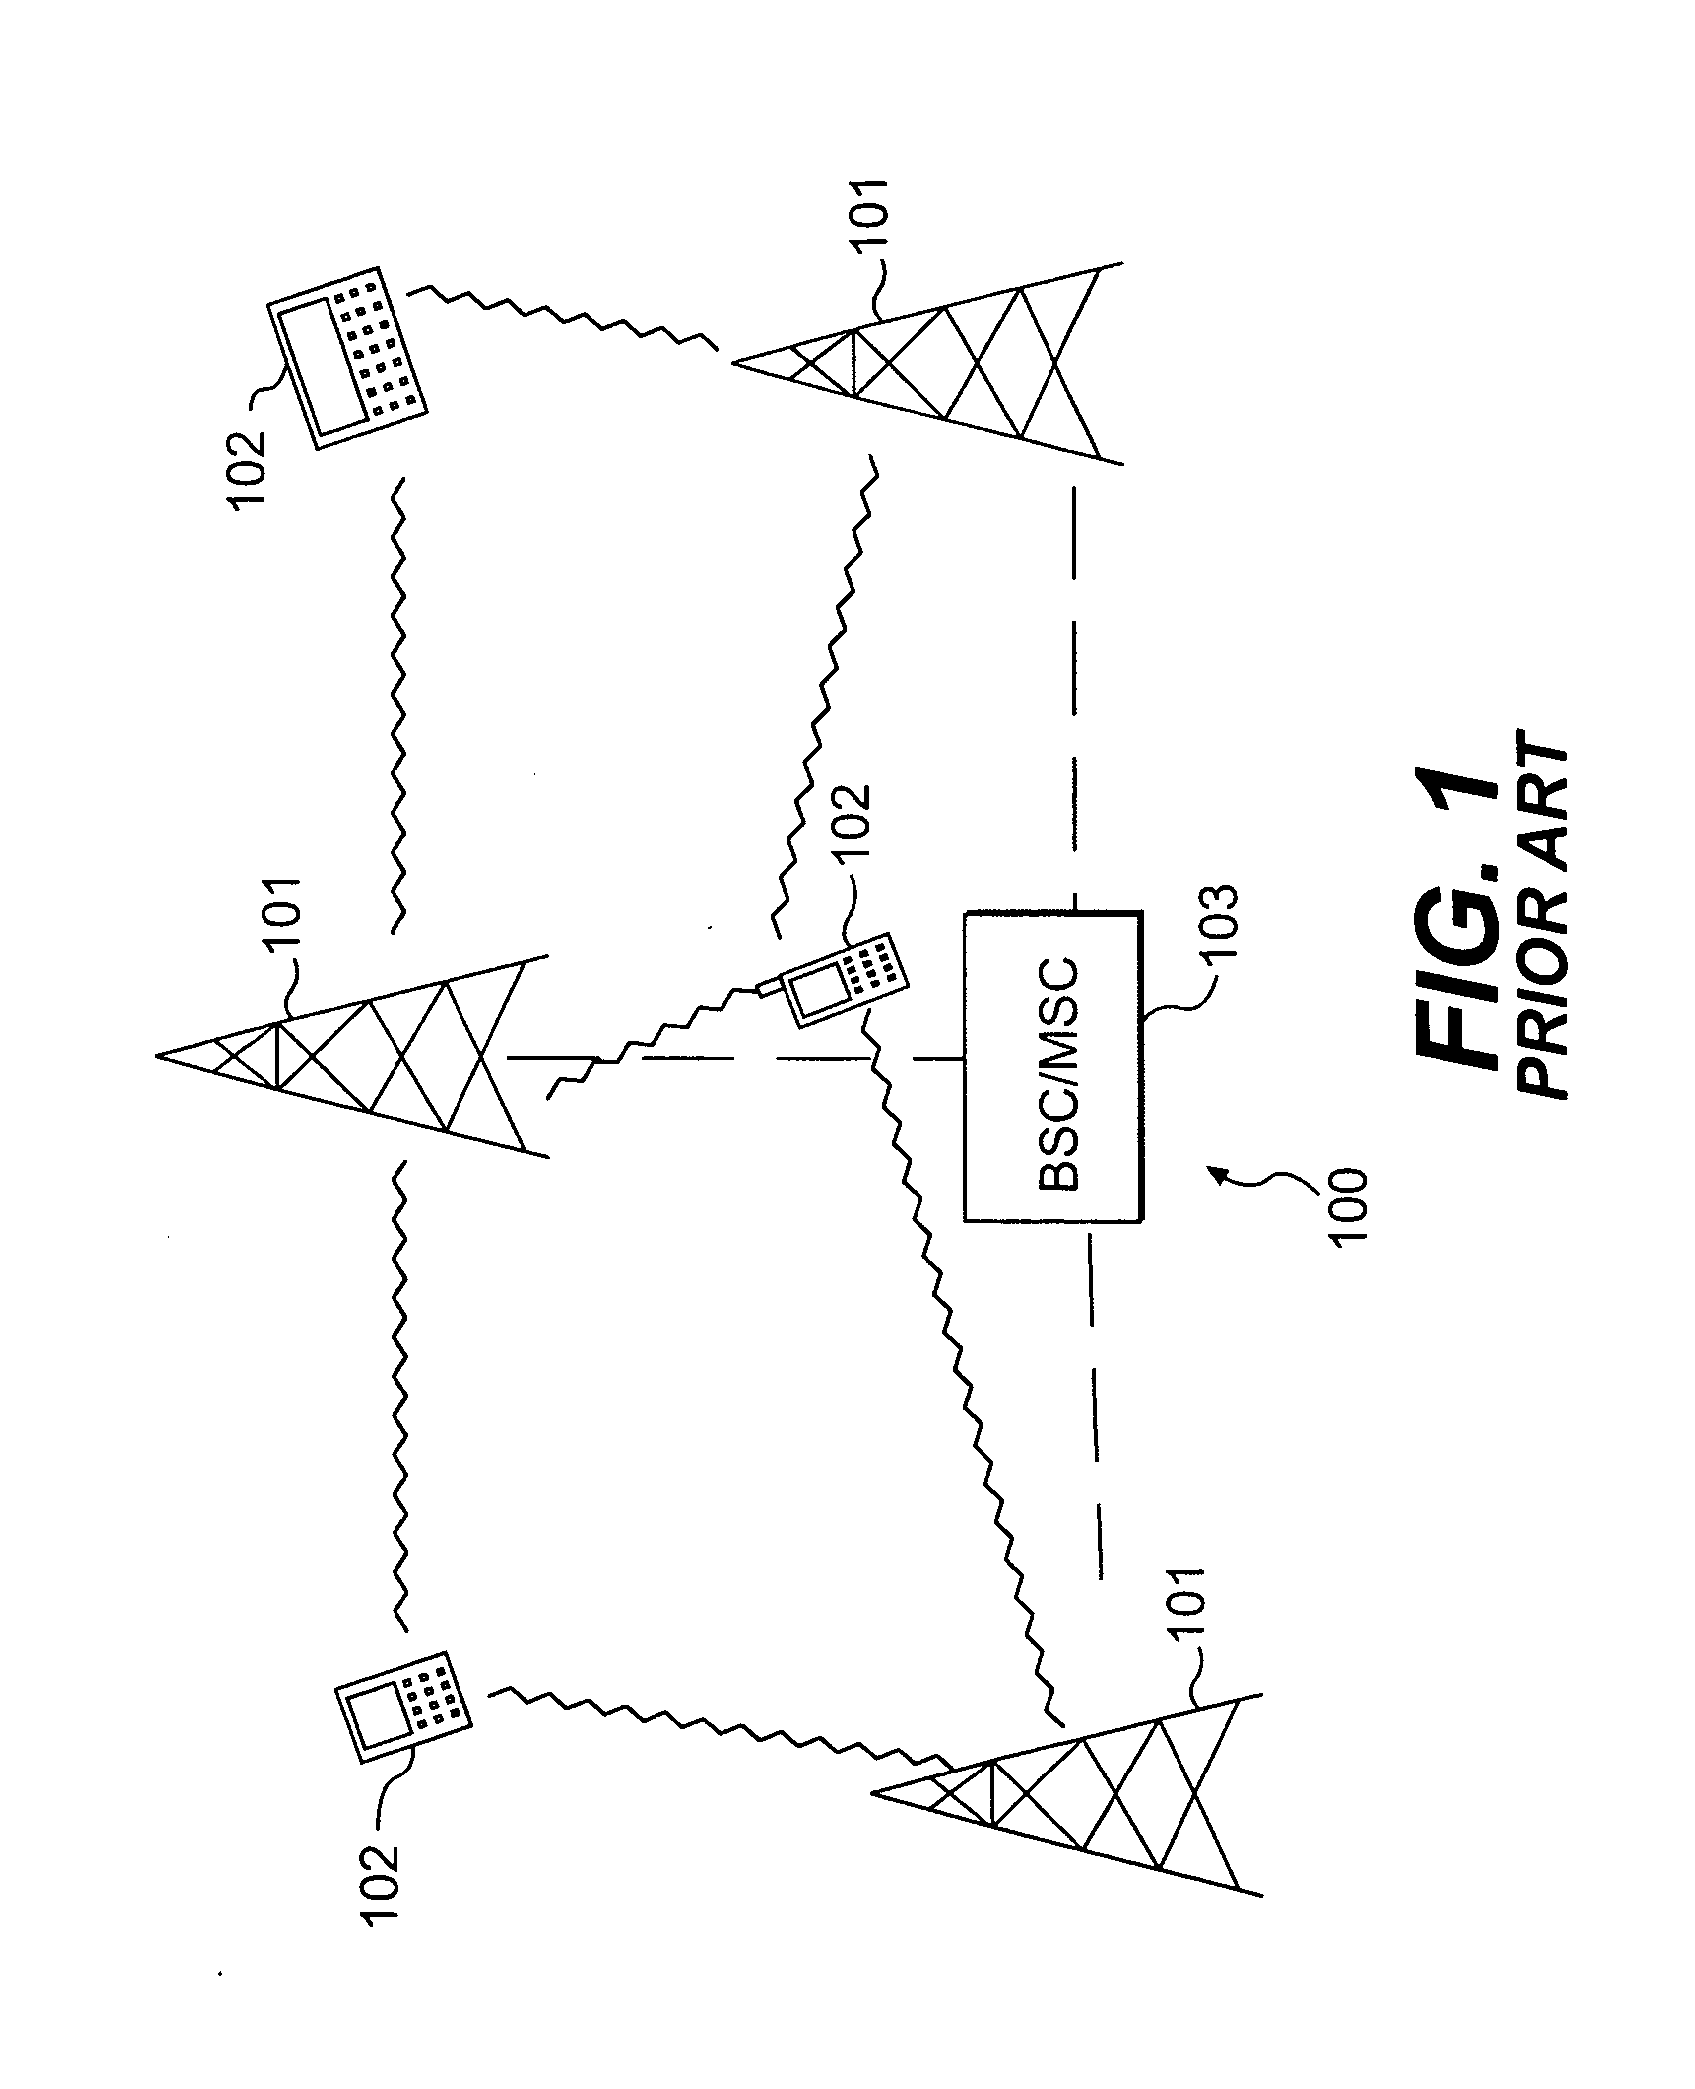 System and method for constructing a carrier to interference matrix based on subscriber calls